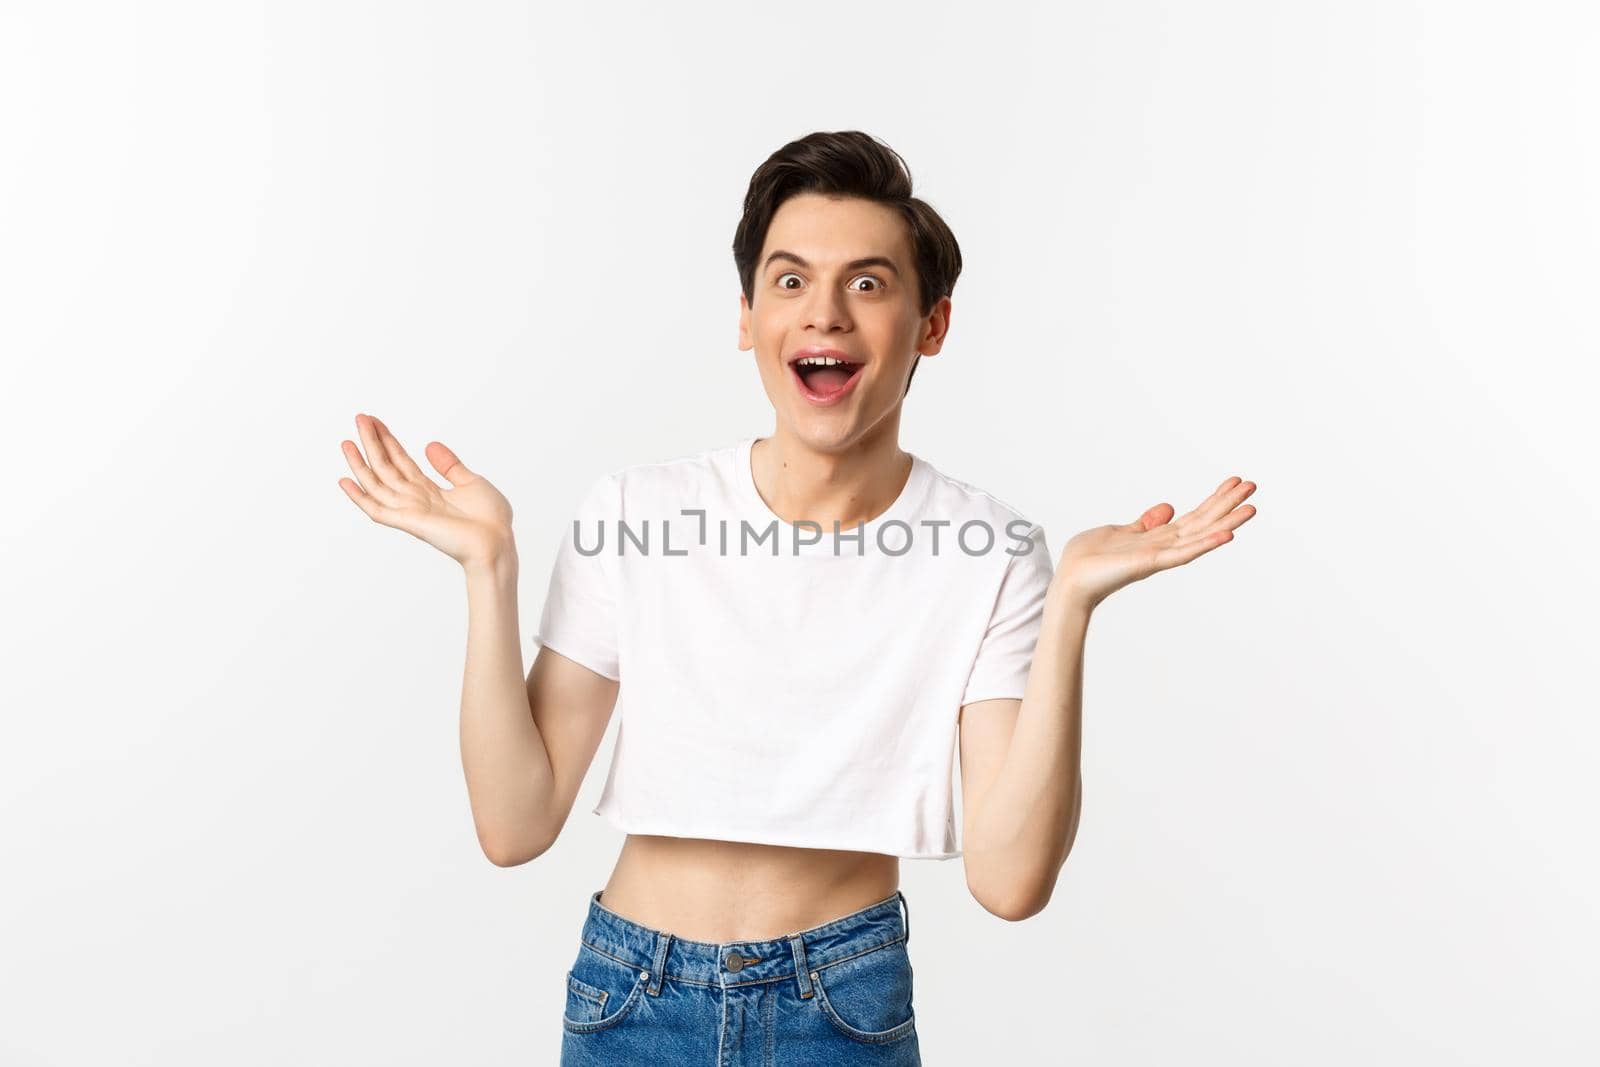 Lgbtq and pride concept. Handsome young man in crop top raising hands up and looking surprised, rejoicing of good news, standing over white background.